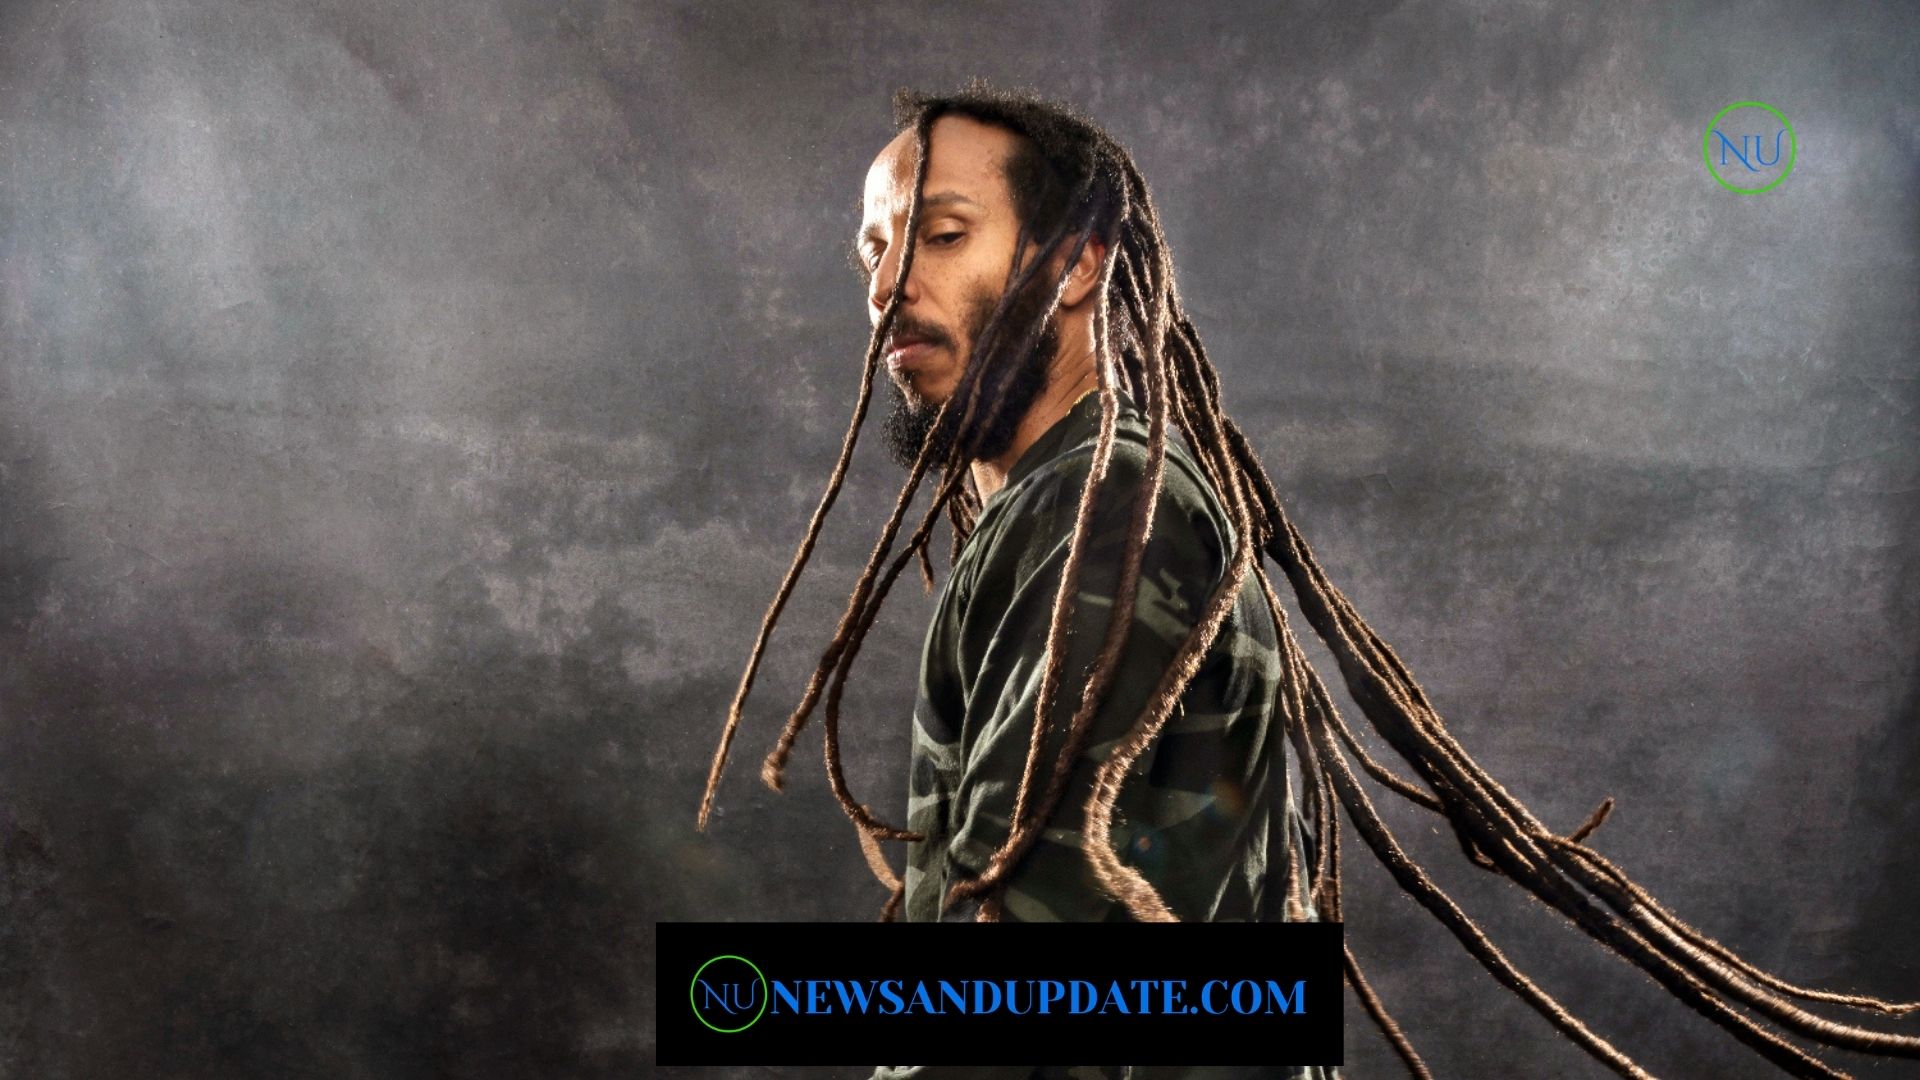 Know About Ziggy Marley’s Wife & His Professional Career!